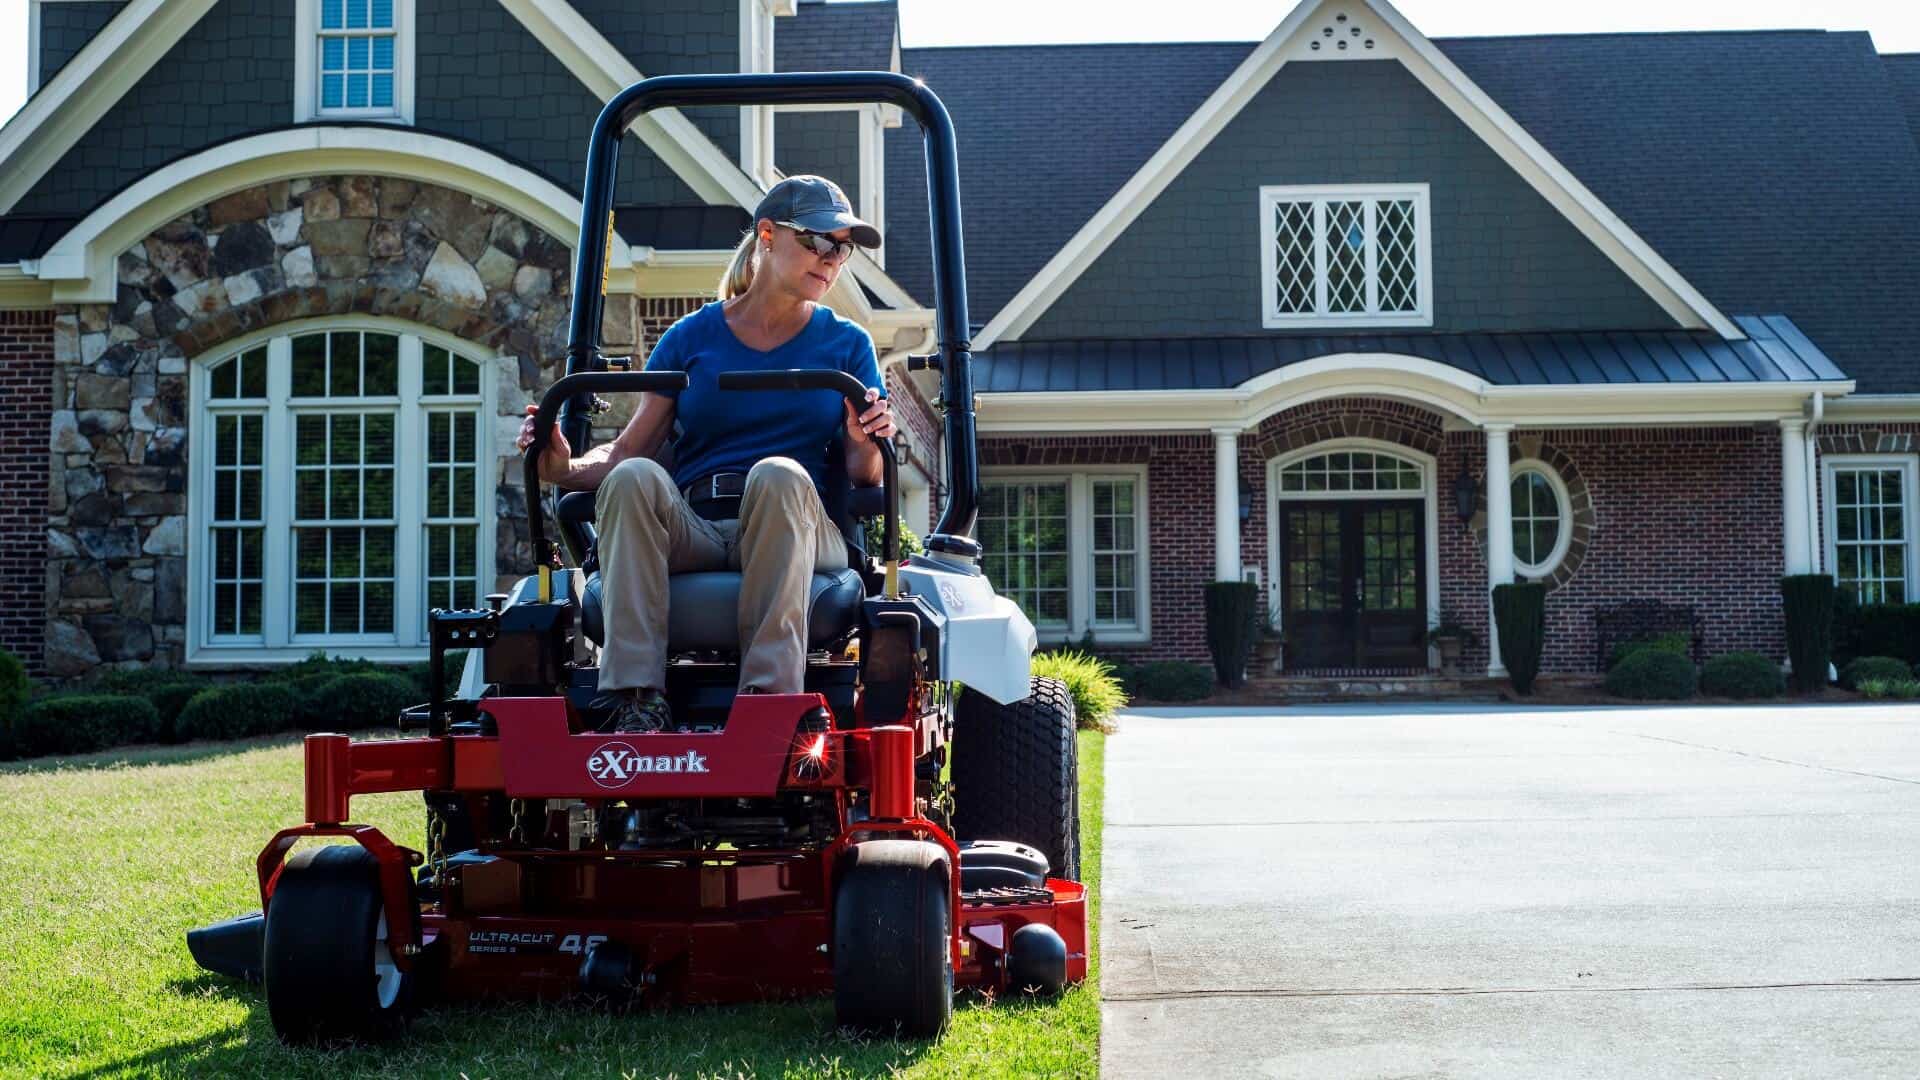 Mowing lawn during hot weather